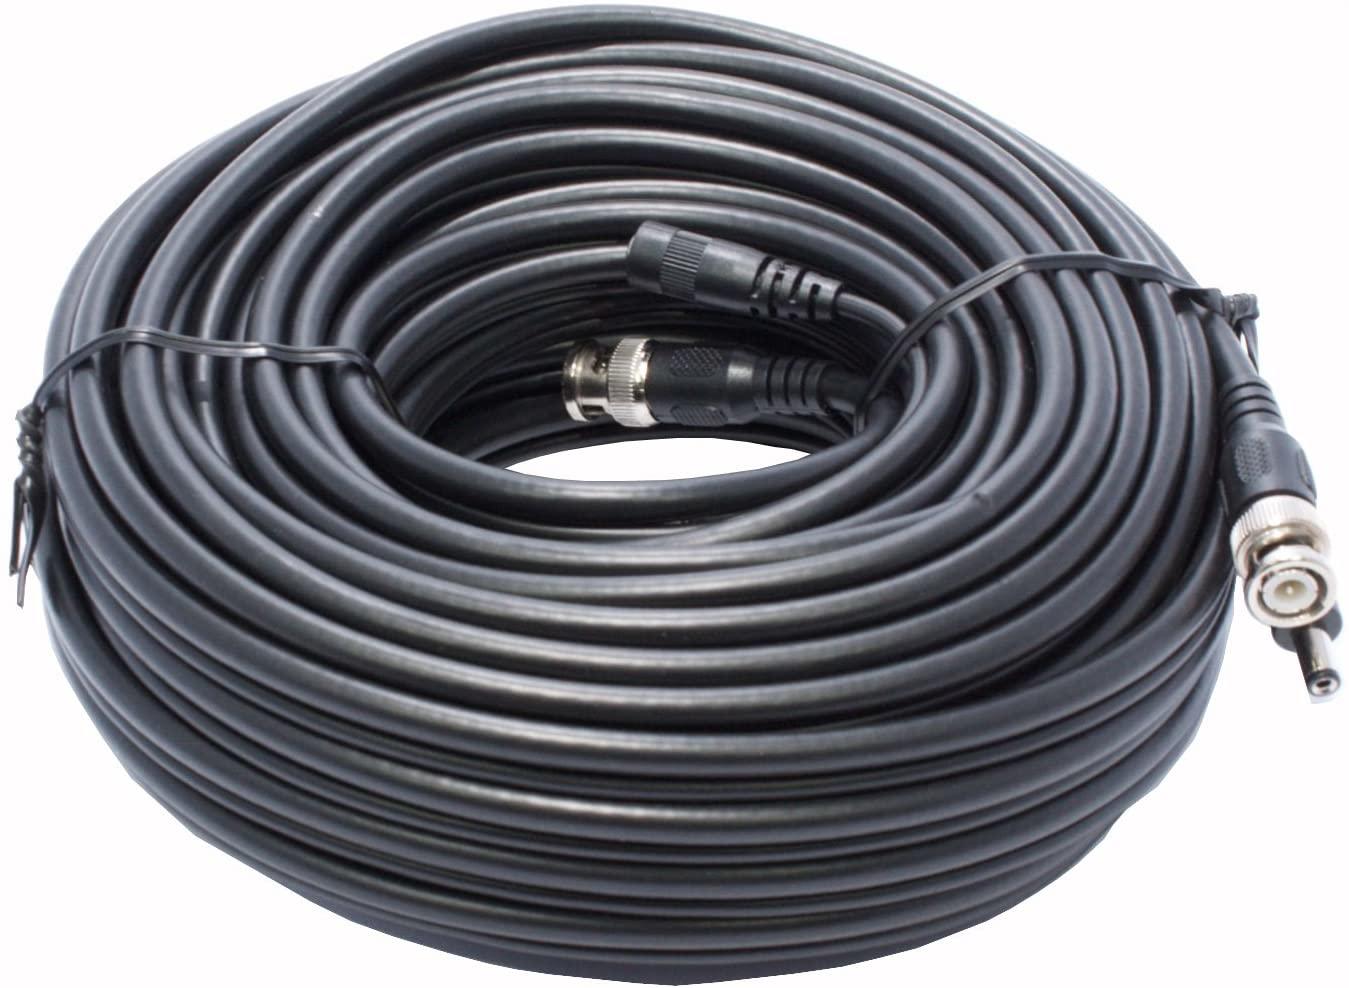 10m RG59+2 Pre-Terminated BNC Video and Power Cable for CCTV Camera - Black